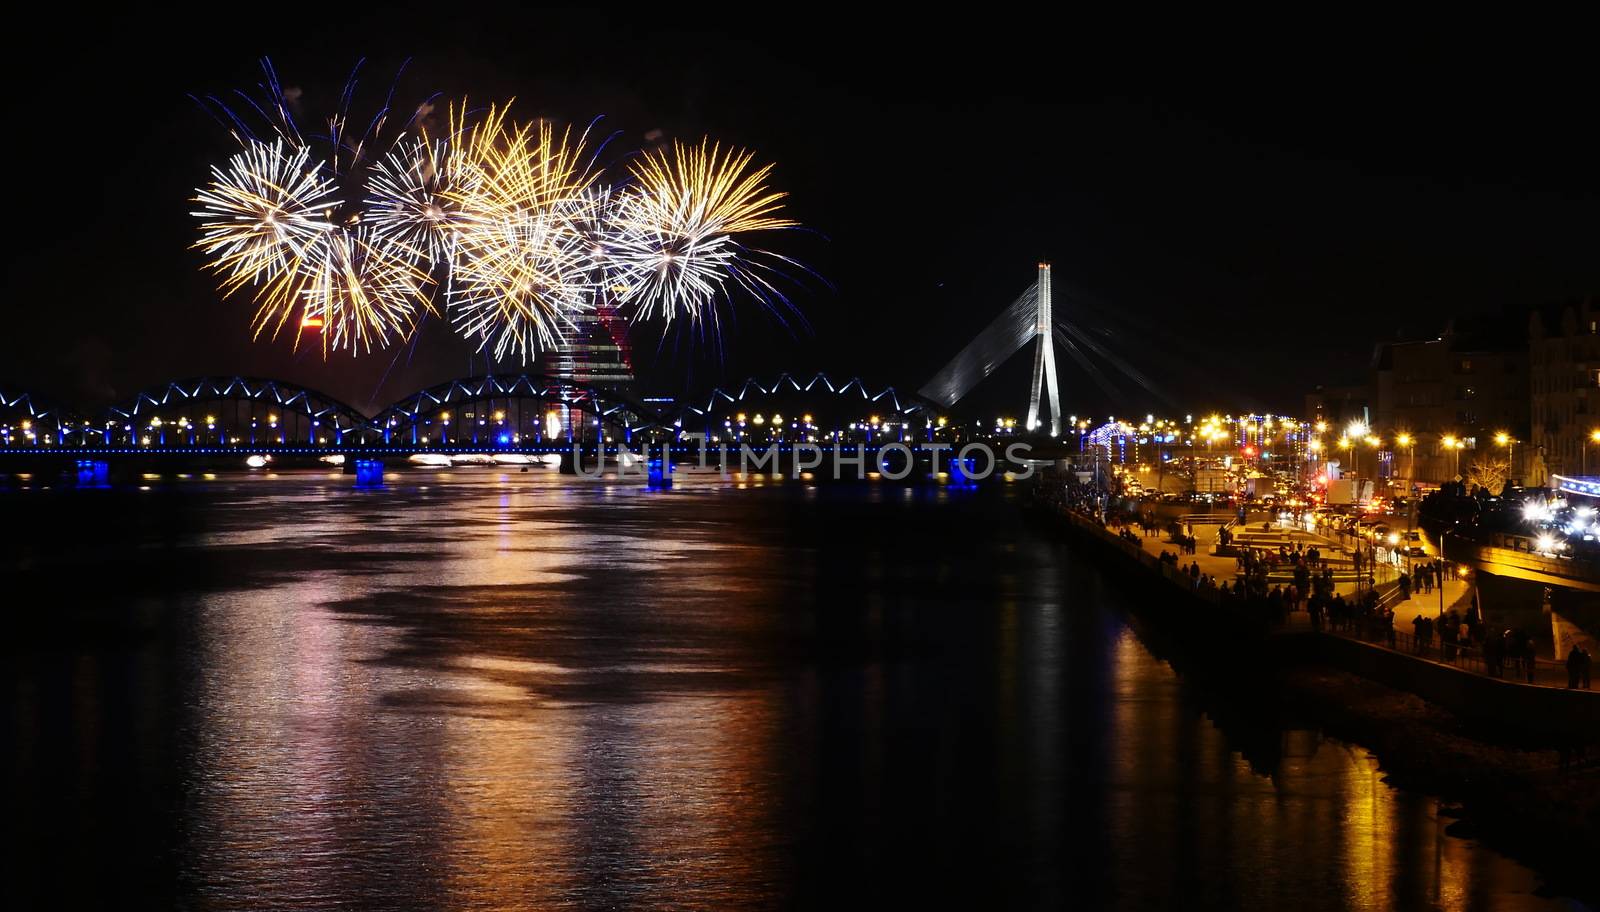 Fireworks in Big Eeuropean city Riga, Independence day